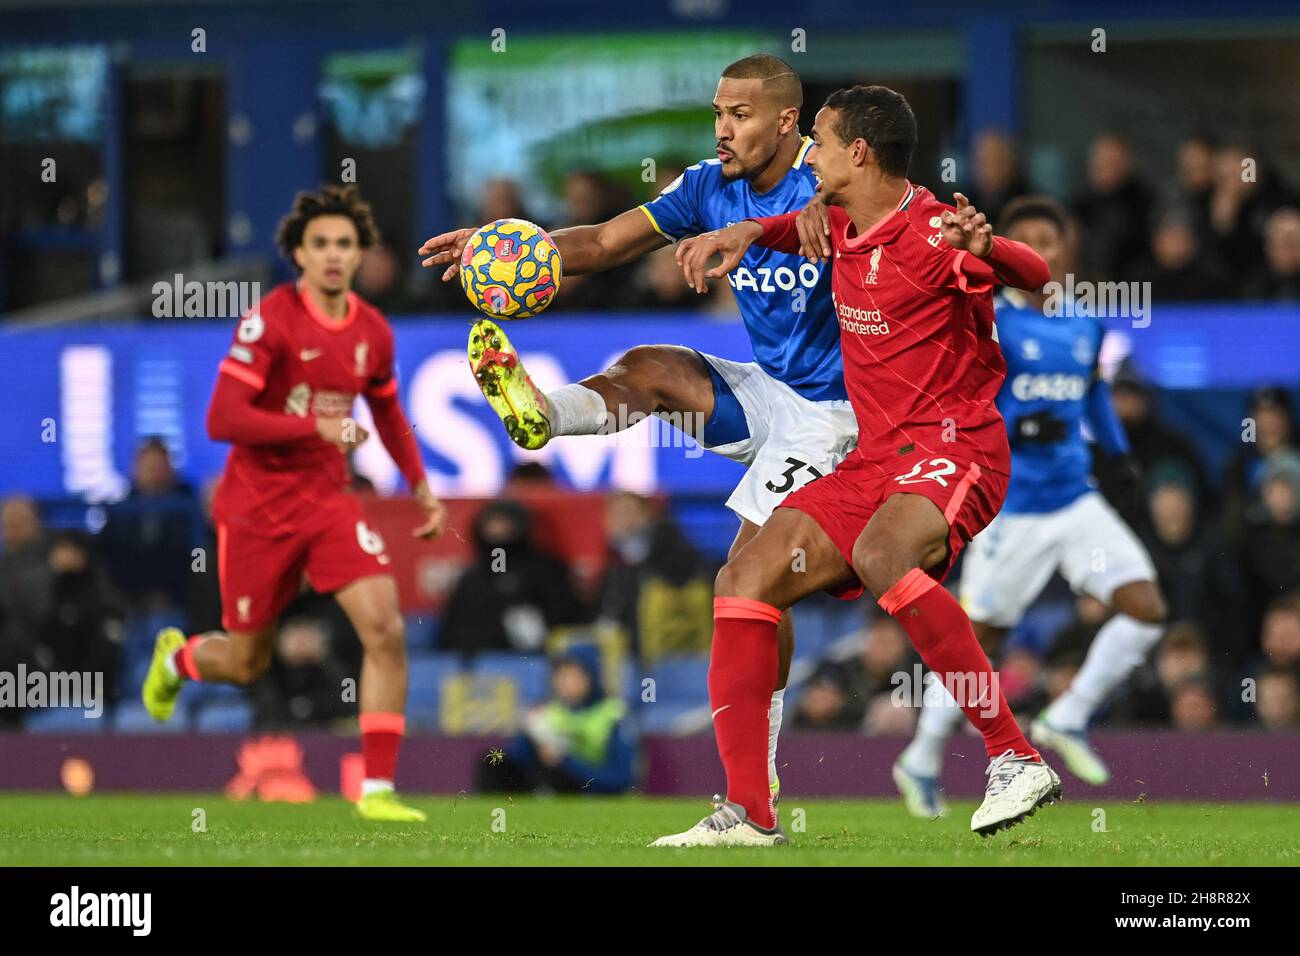 Liverpool, UK. 01st Dec, 2021. Jose Salomon Rondon #33 of Everton and Joel Matip #32 of Liverpool battle for the ball in Liverpool, United Kingdom on 12/1/2021. (Photo by Craig Thomas/News Images/Sipa USA) Credit: Sipa USA/Alamy Live News Stock Photo